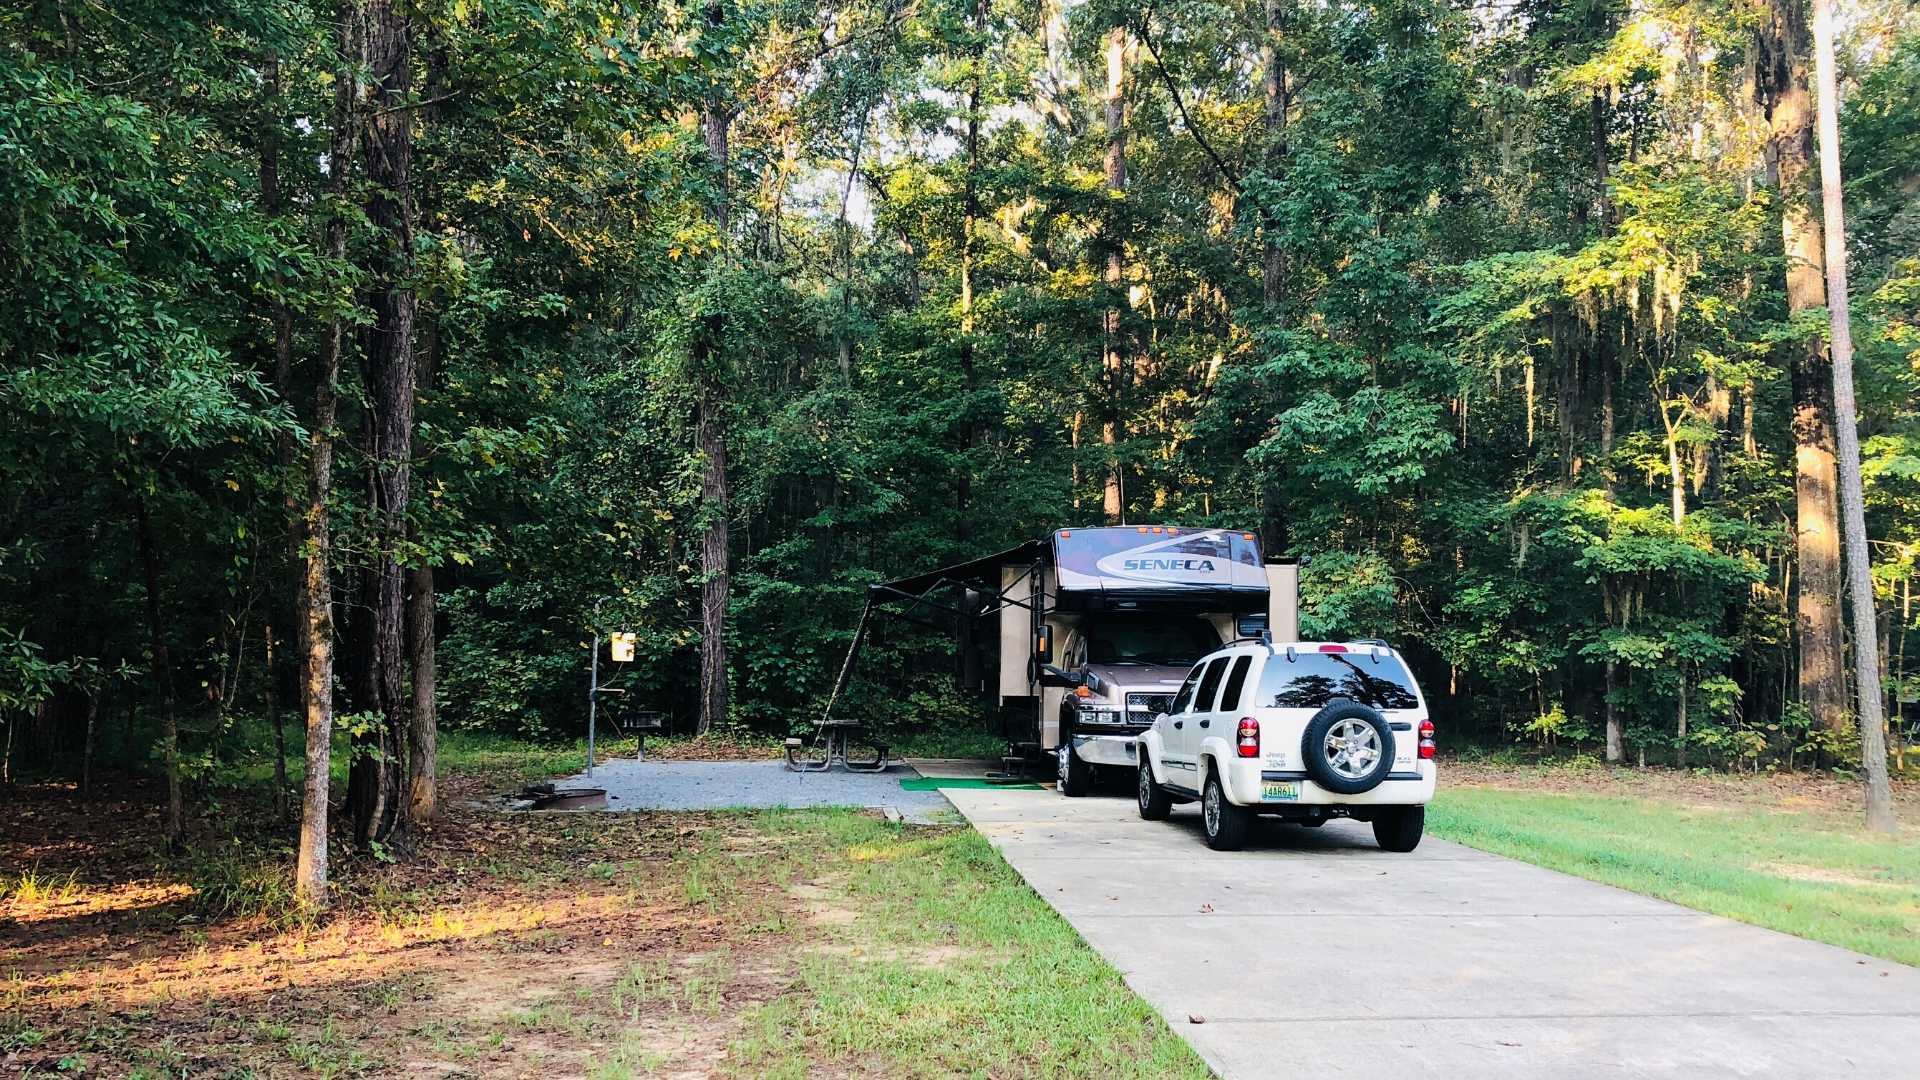 RV parked with two vehicle in a forested park.